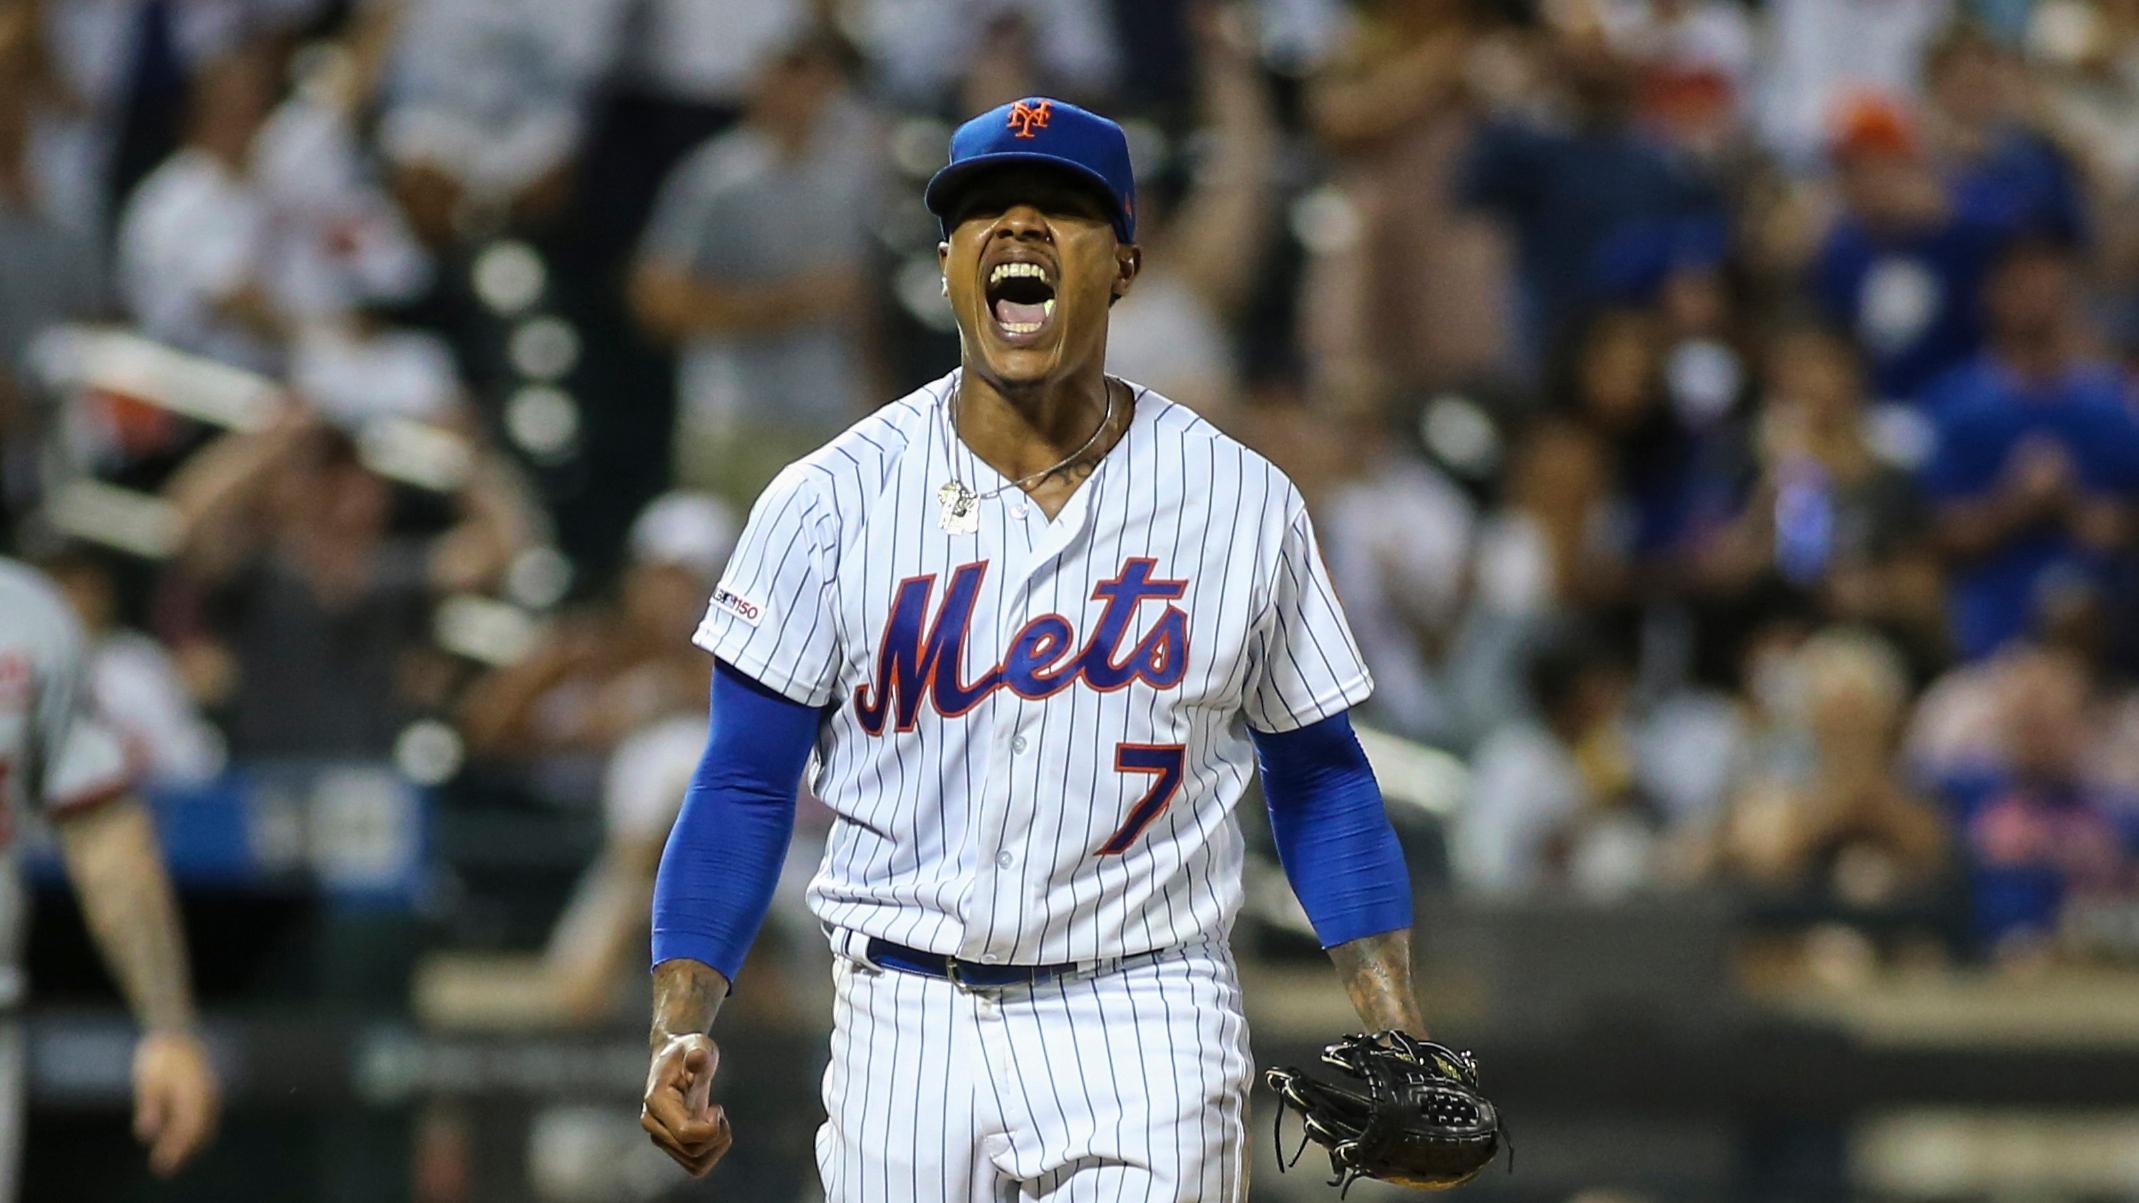 Marcus Stroman amped up after pitch / Wendell Cruz/USA TODAY